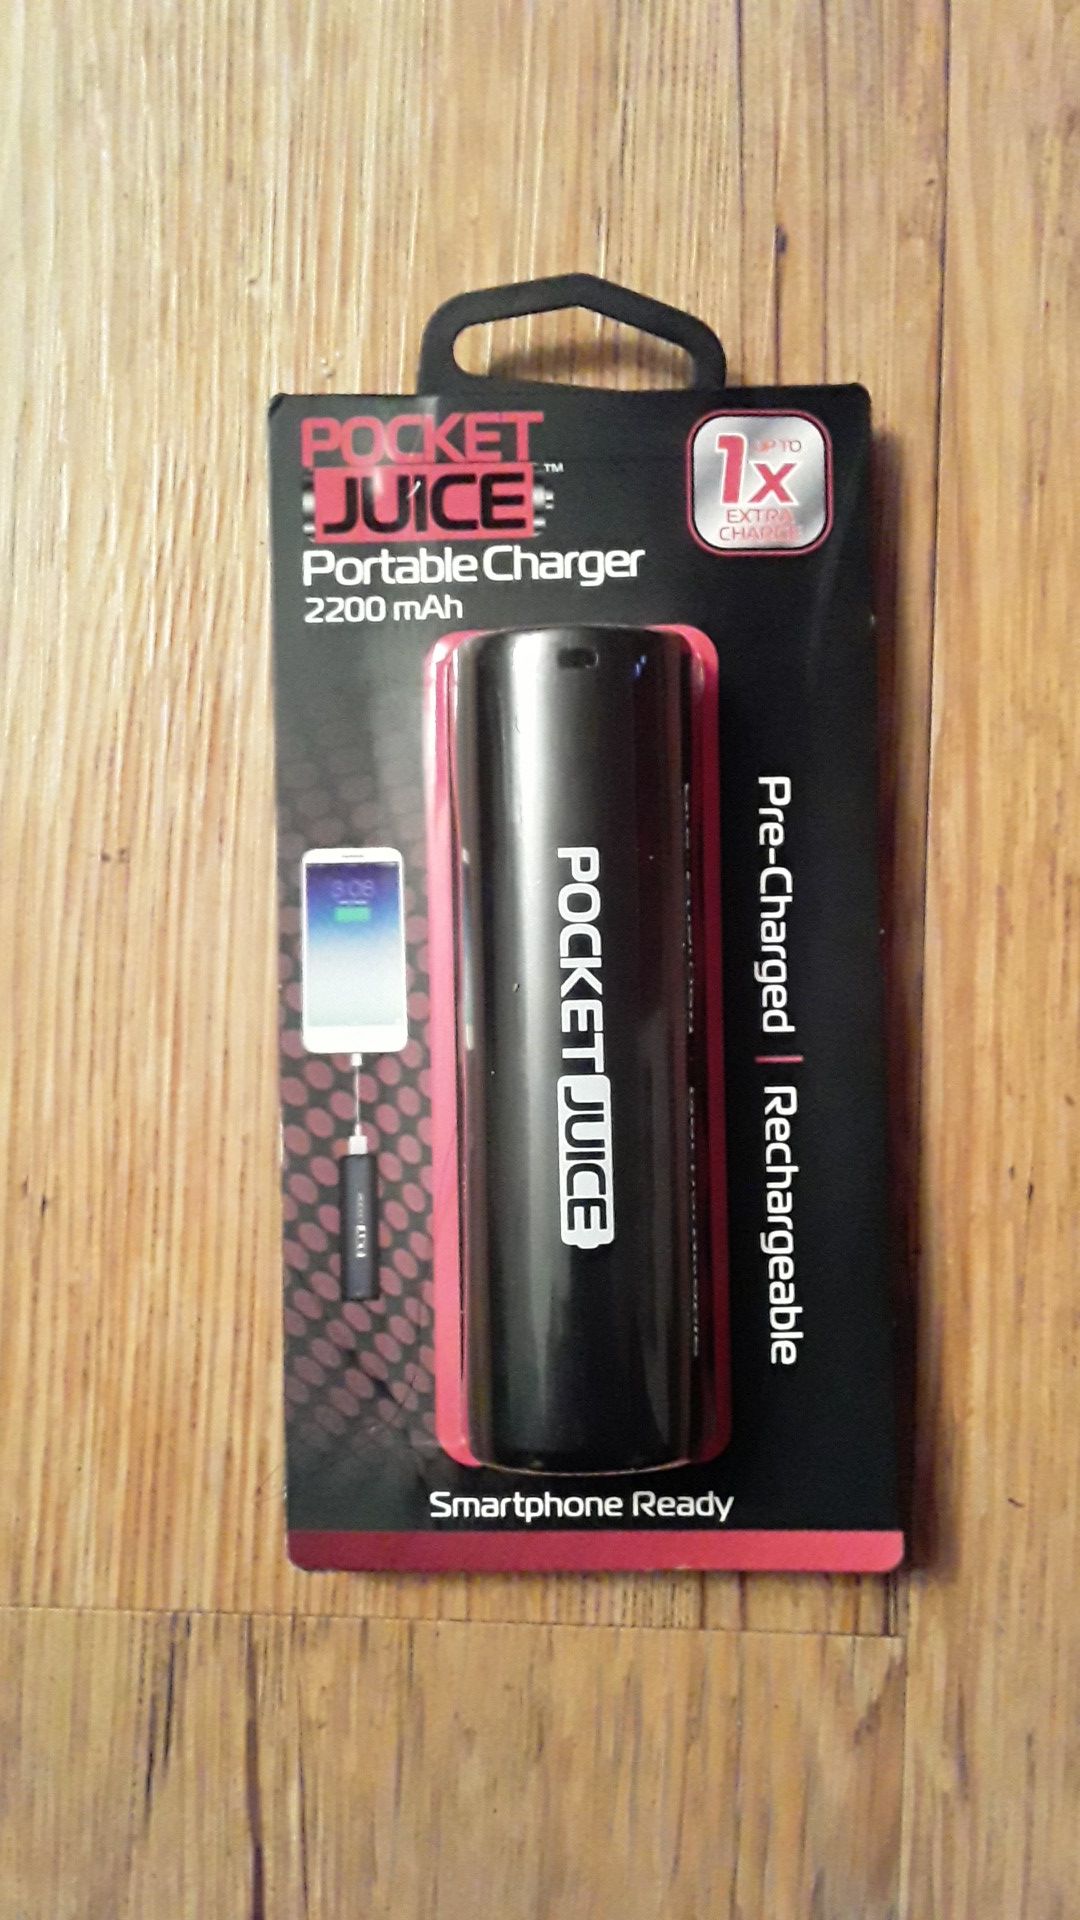 Pocket Juice new unopened 2200 mah portable charger